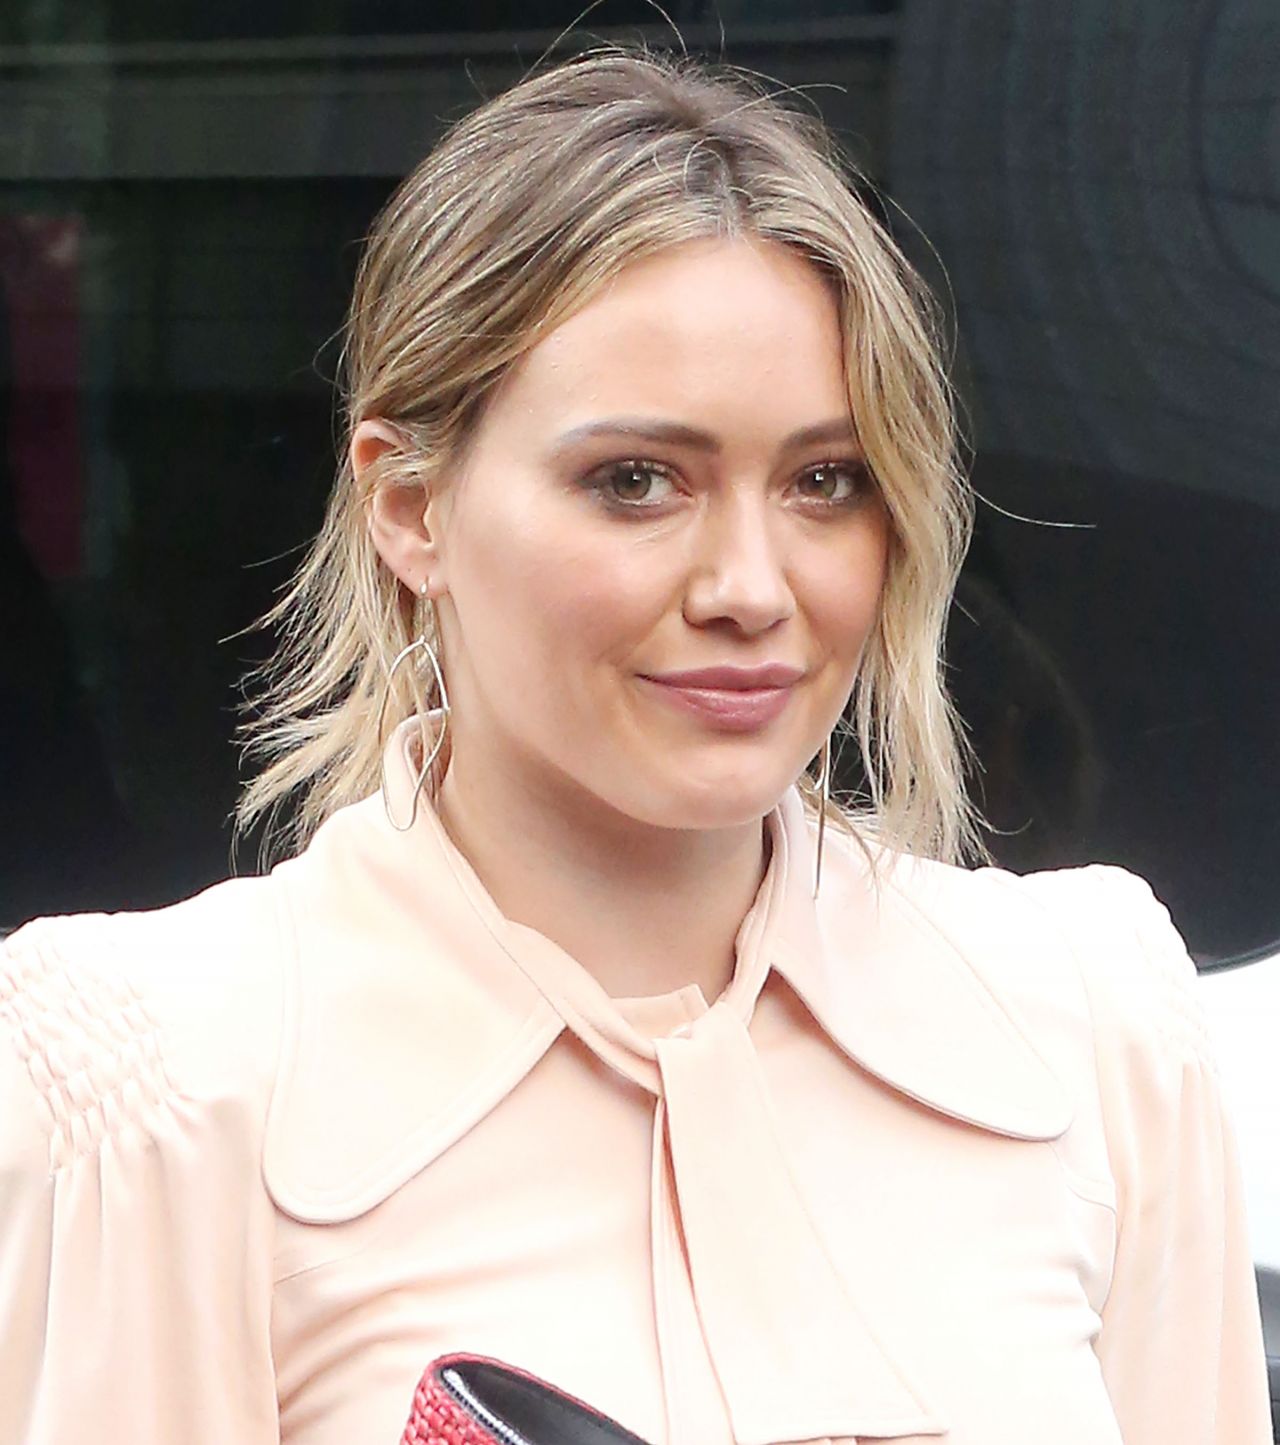 Hilary Duff Younger Set February 27, 2018 – Star Style